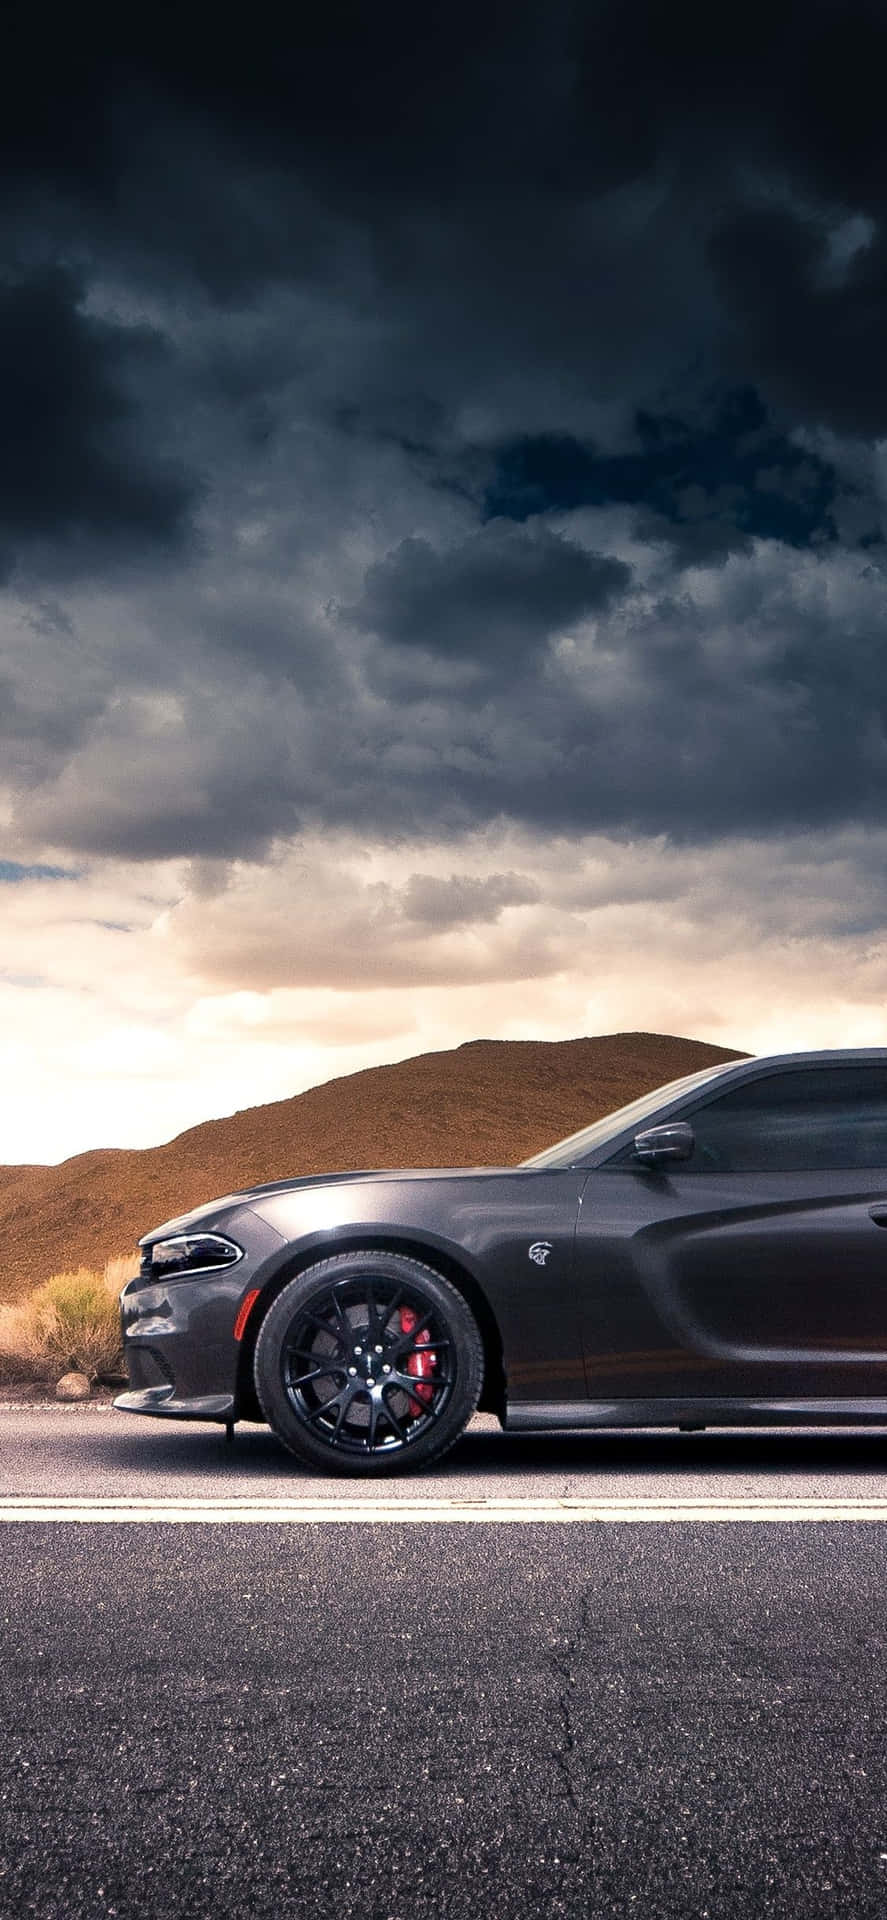 2020 Dodge Charger Scat Pack Widebody Phone Wallpaper 001  WSupercars